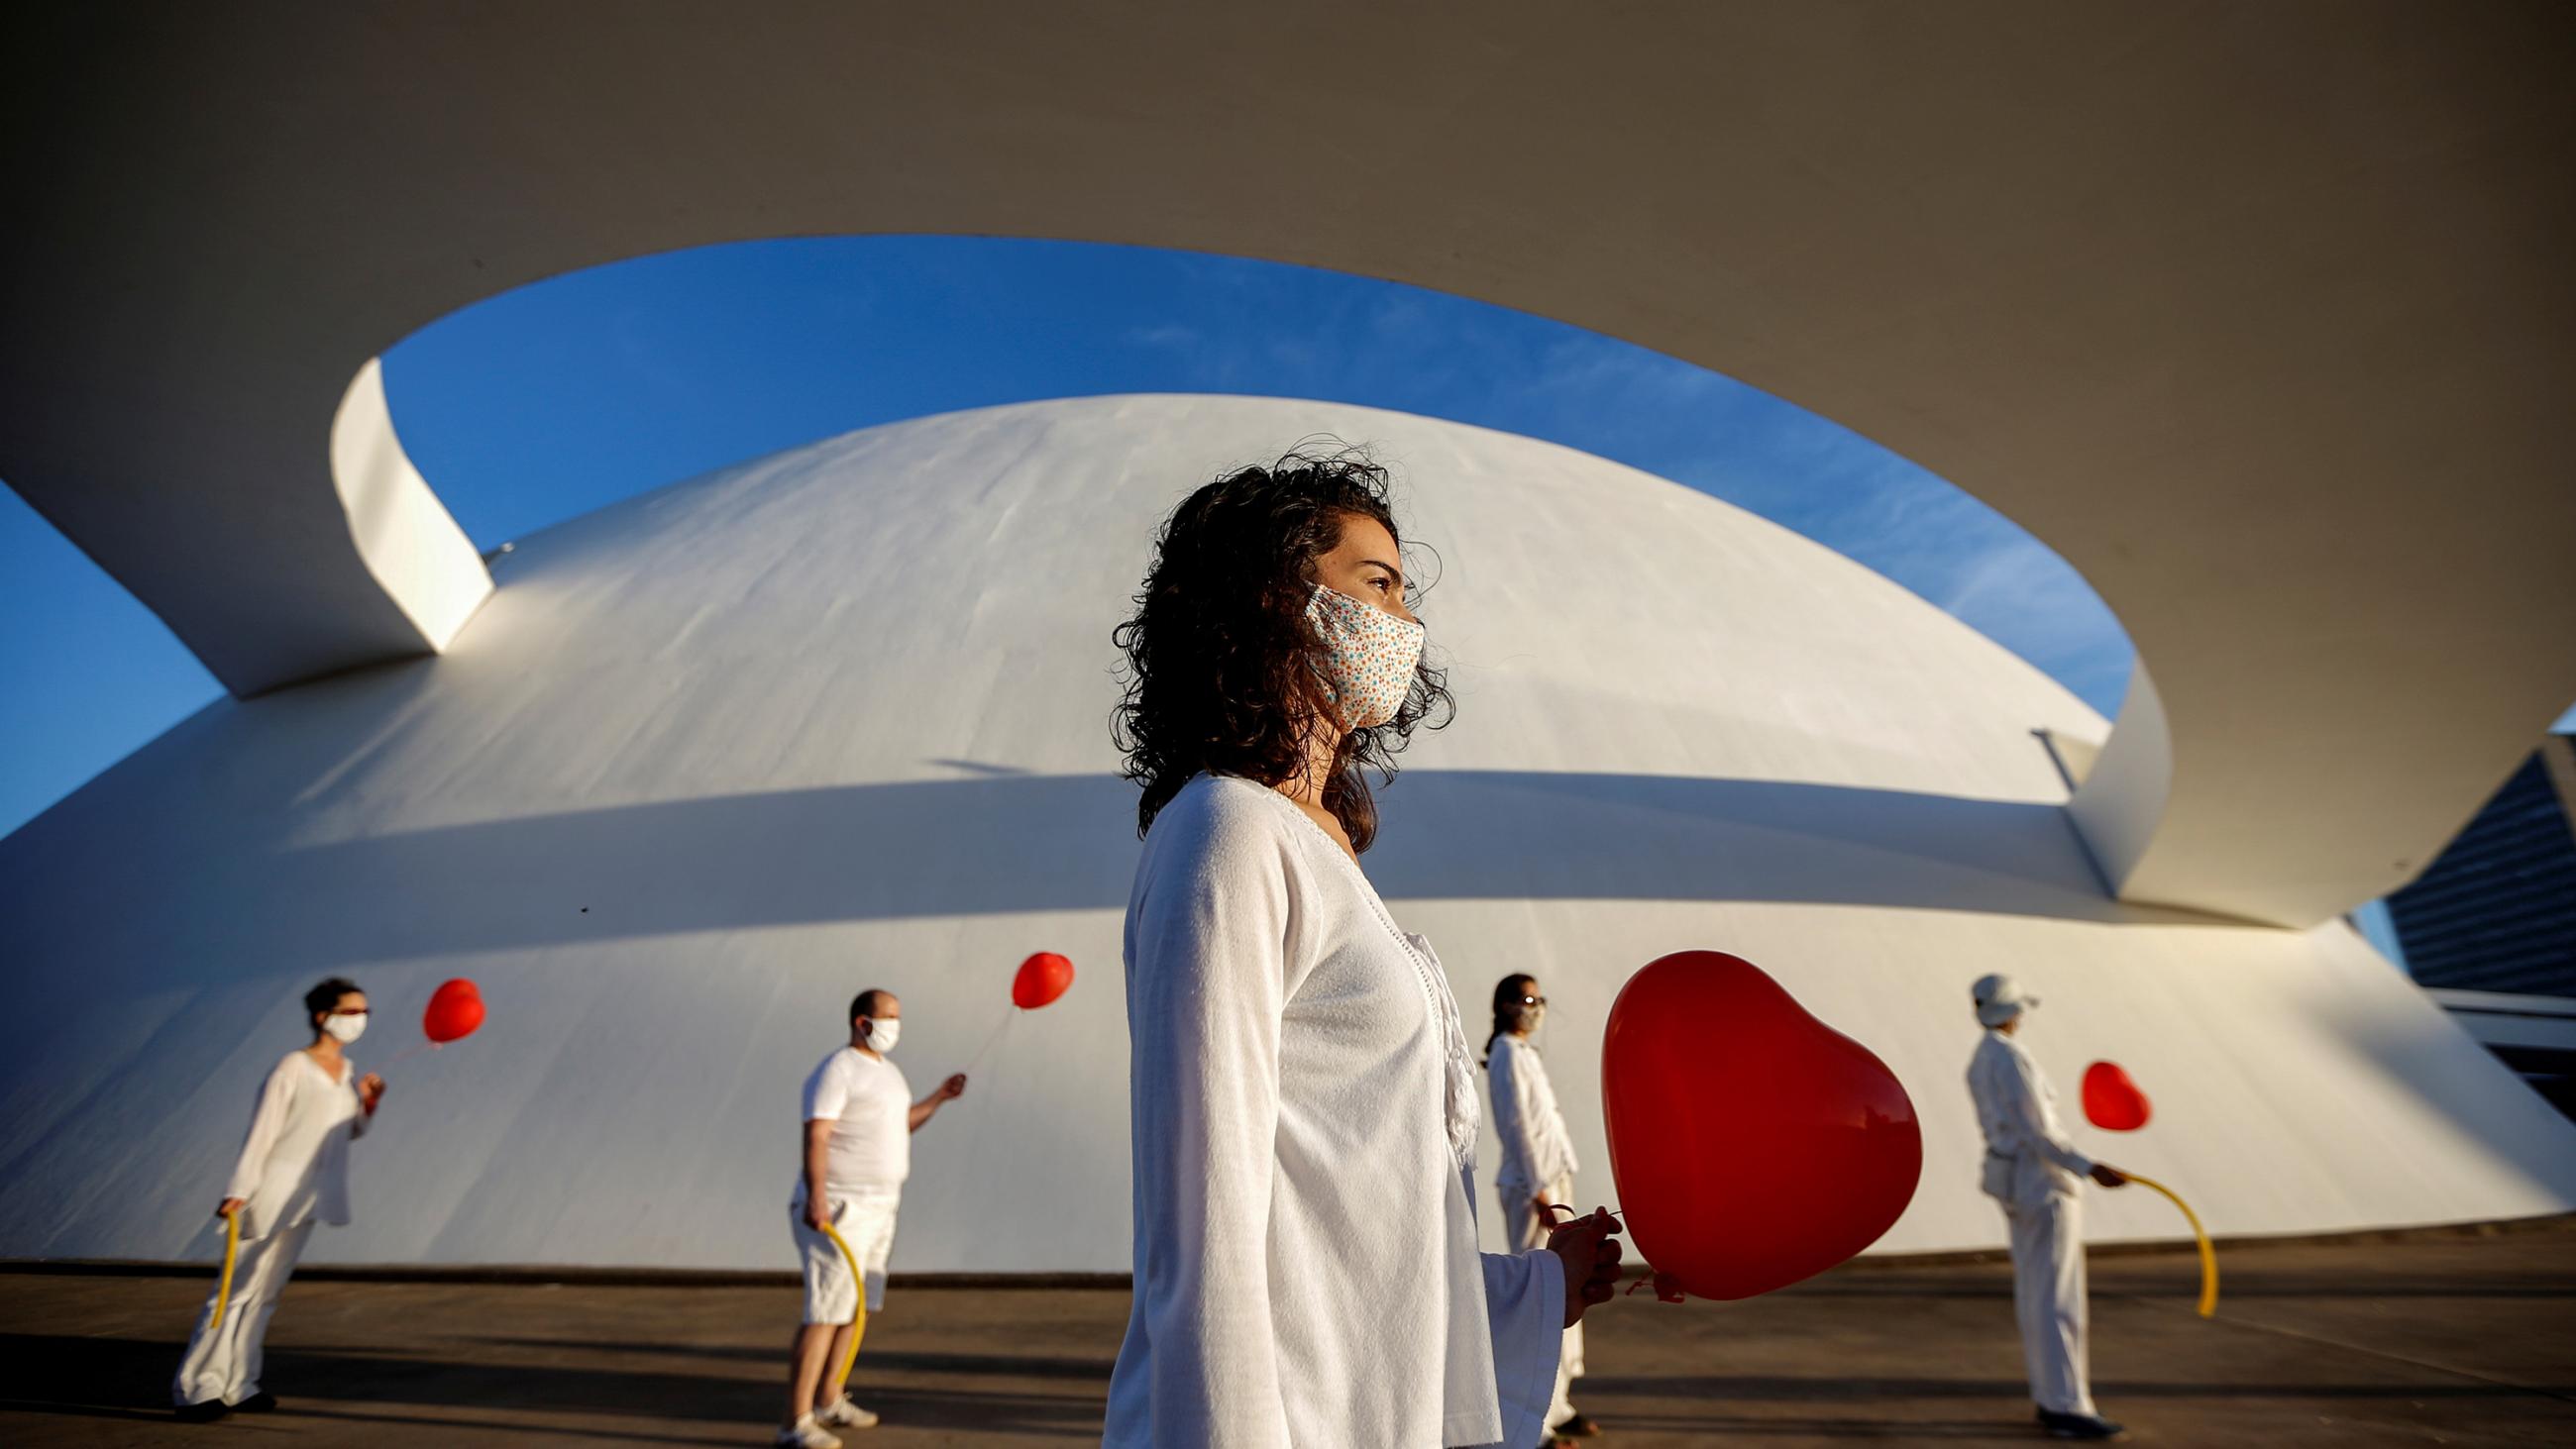 The photo shows a performance art piece with a woman wearing white in the foreground and four people wearing white and holding red balloons in the background. 